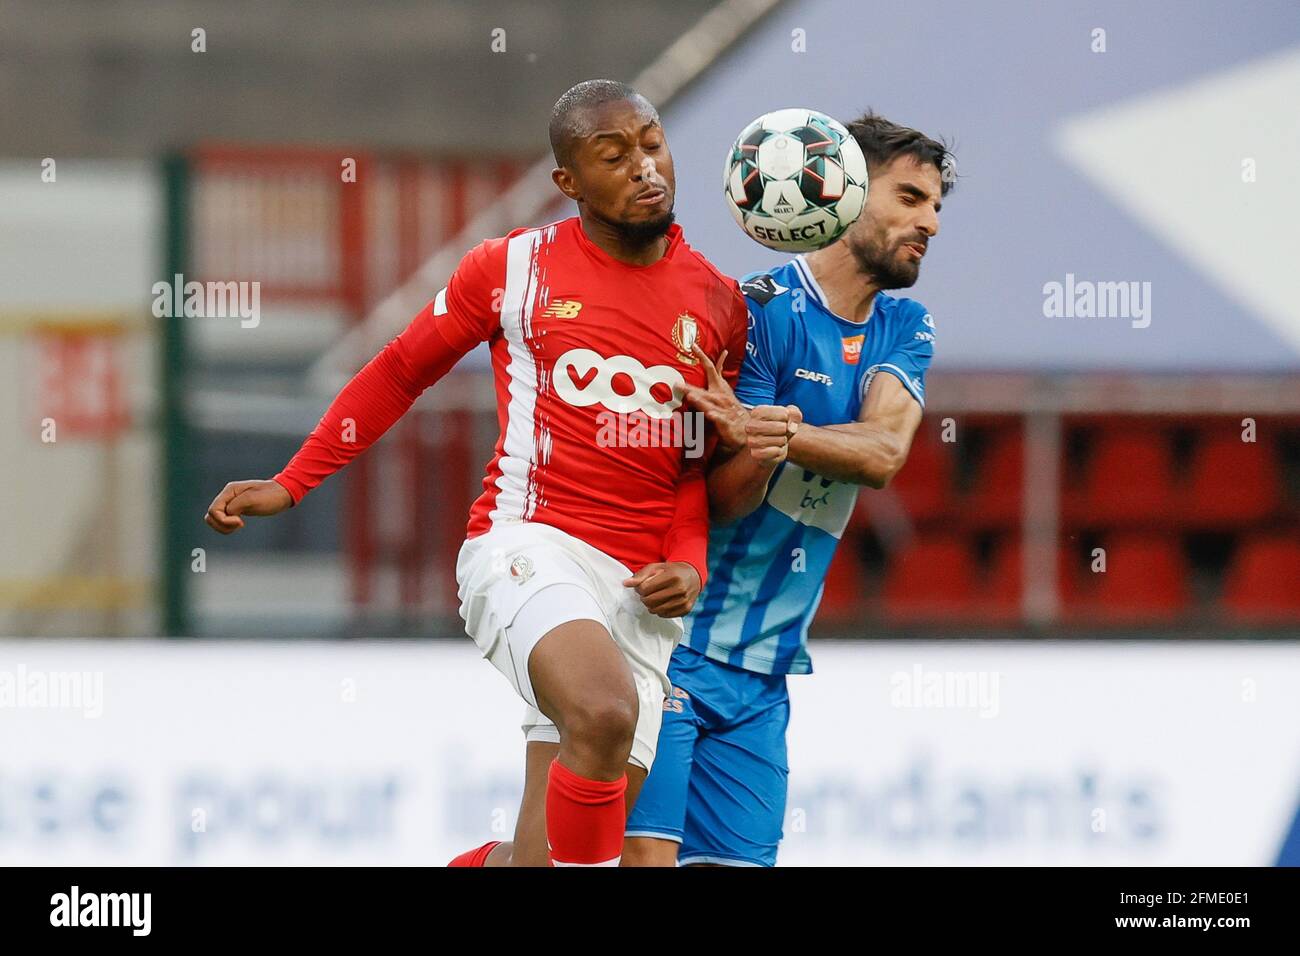 Standard's Samuel Bastien and Gent's Milad Mohammadi fight for the ball during a soccer match between Standard de Liege and KAA Gent, Saturday 08 May Stock Photo